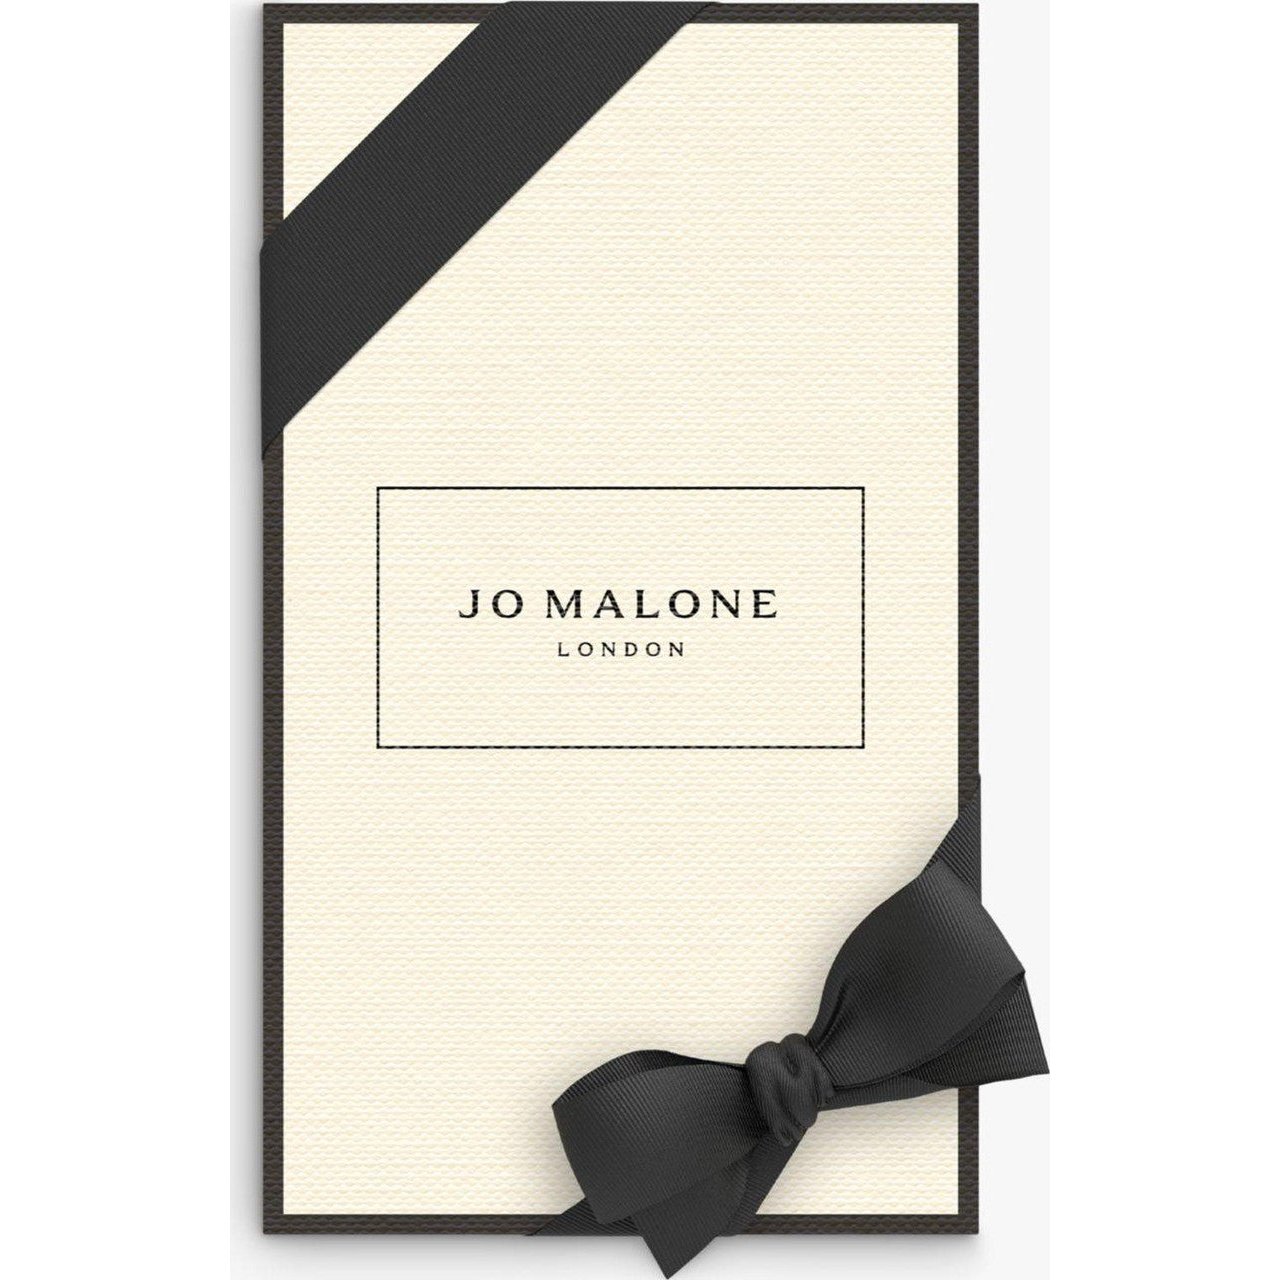 Jo Malone London Red Roses Body and Hand Wash, 250ml